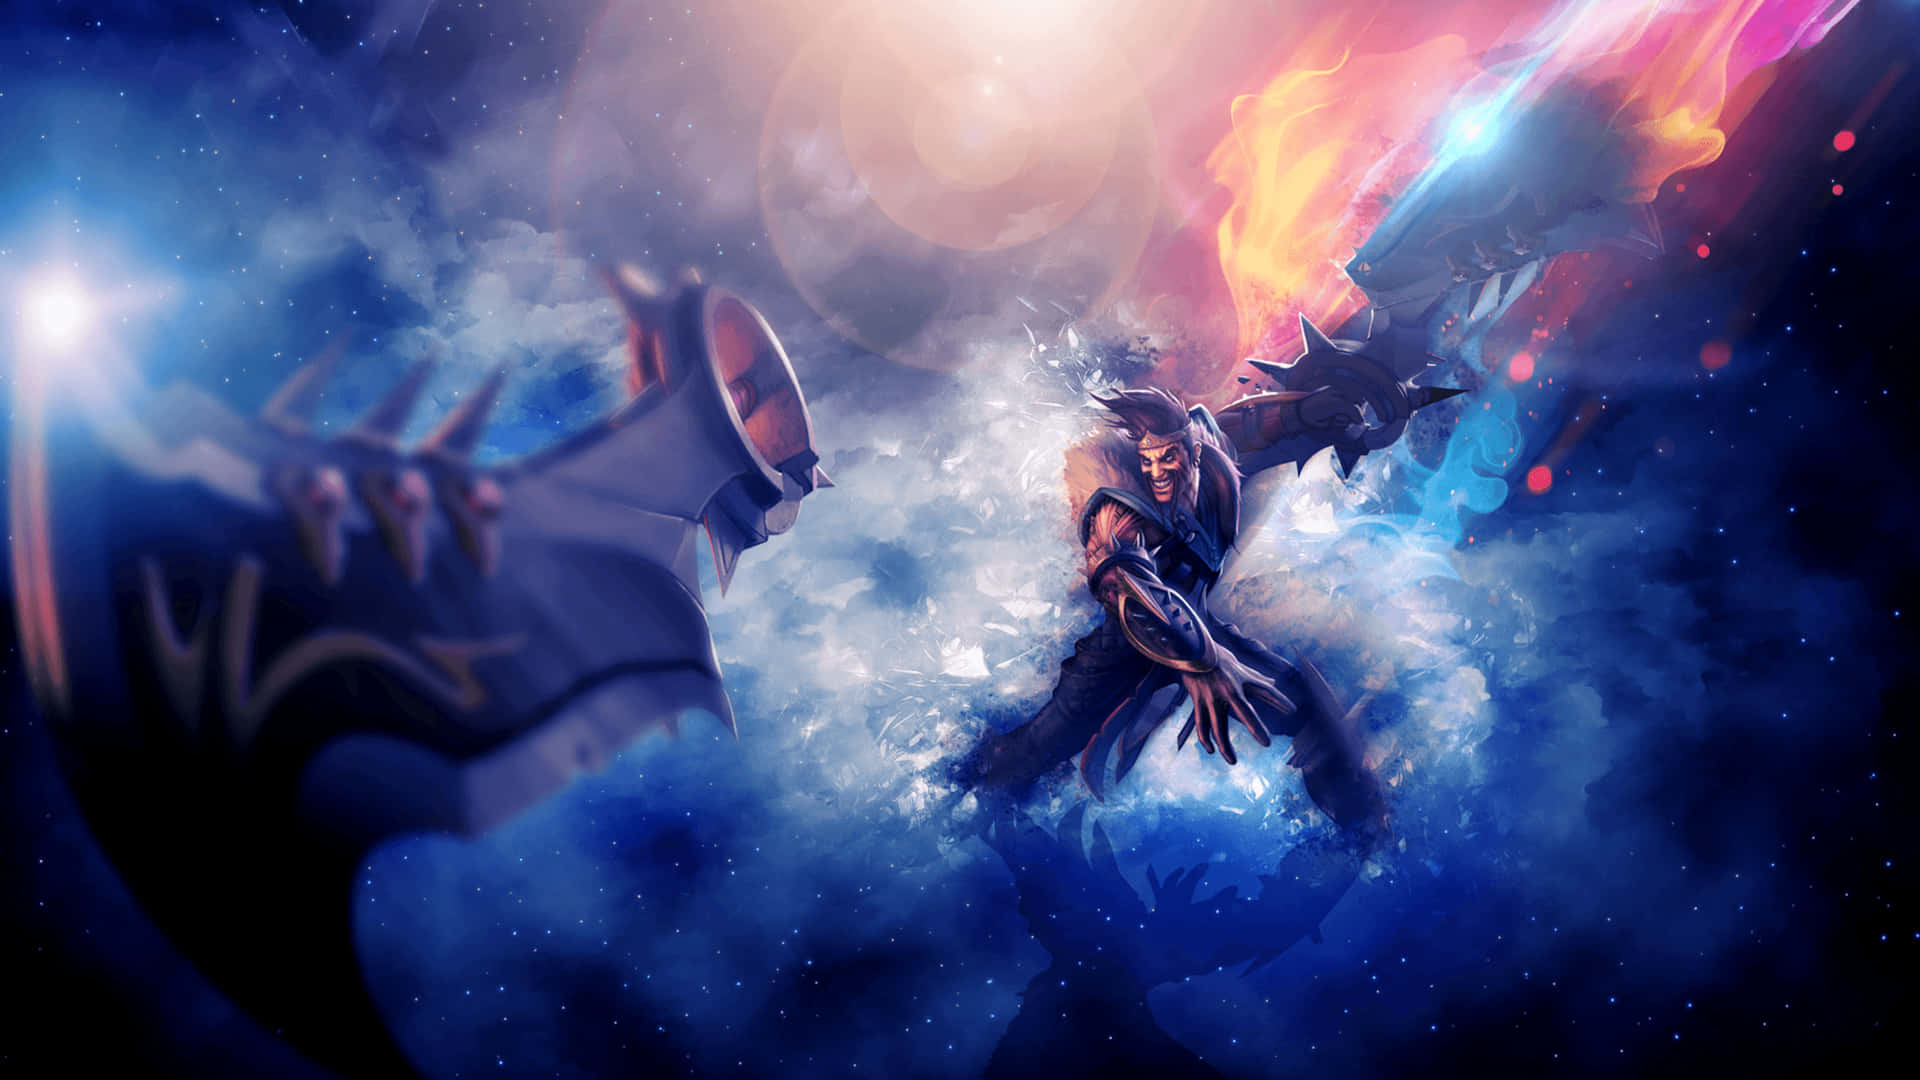 Check Out this Epic 4K League of Legends Wallpaper